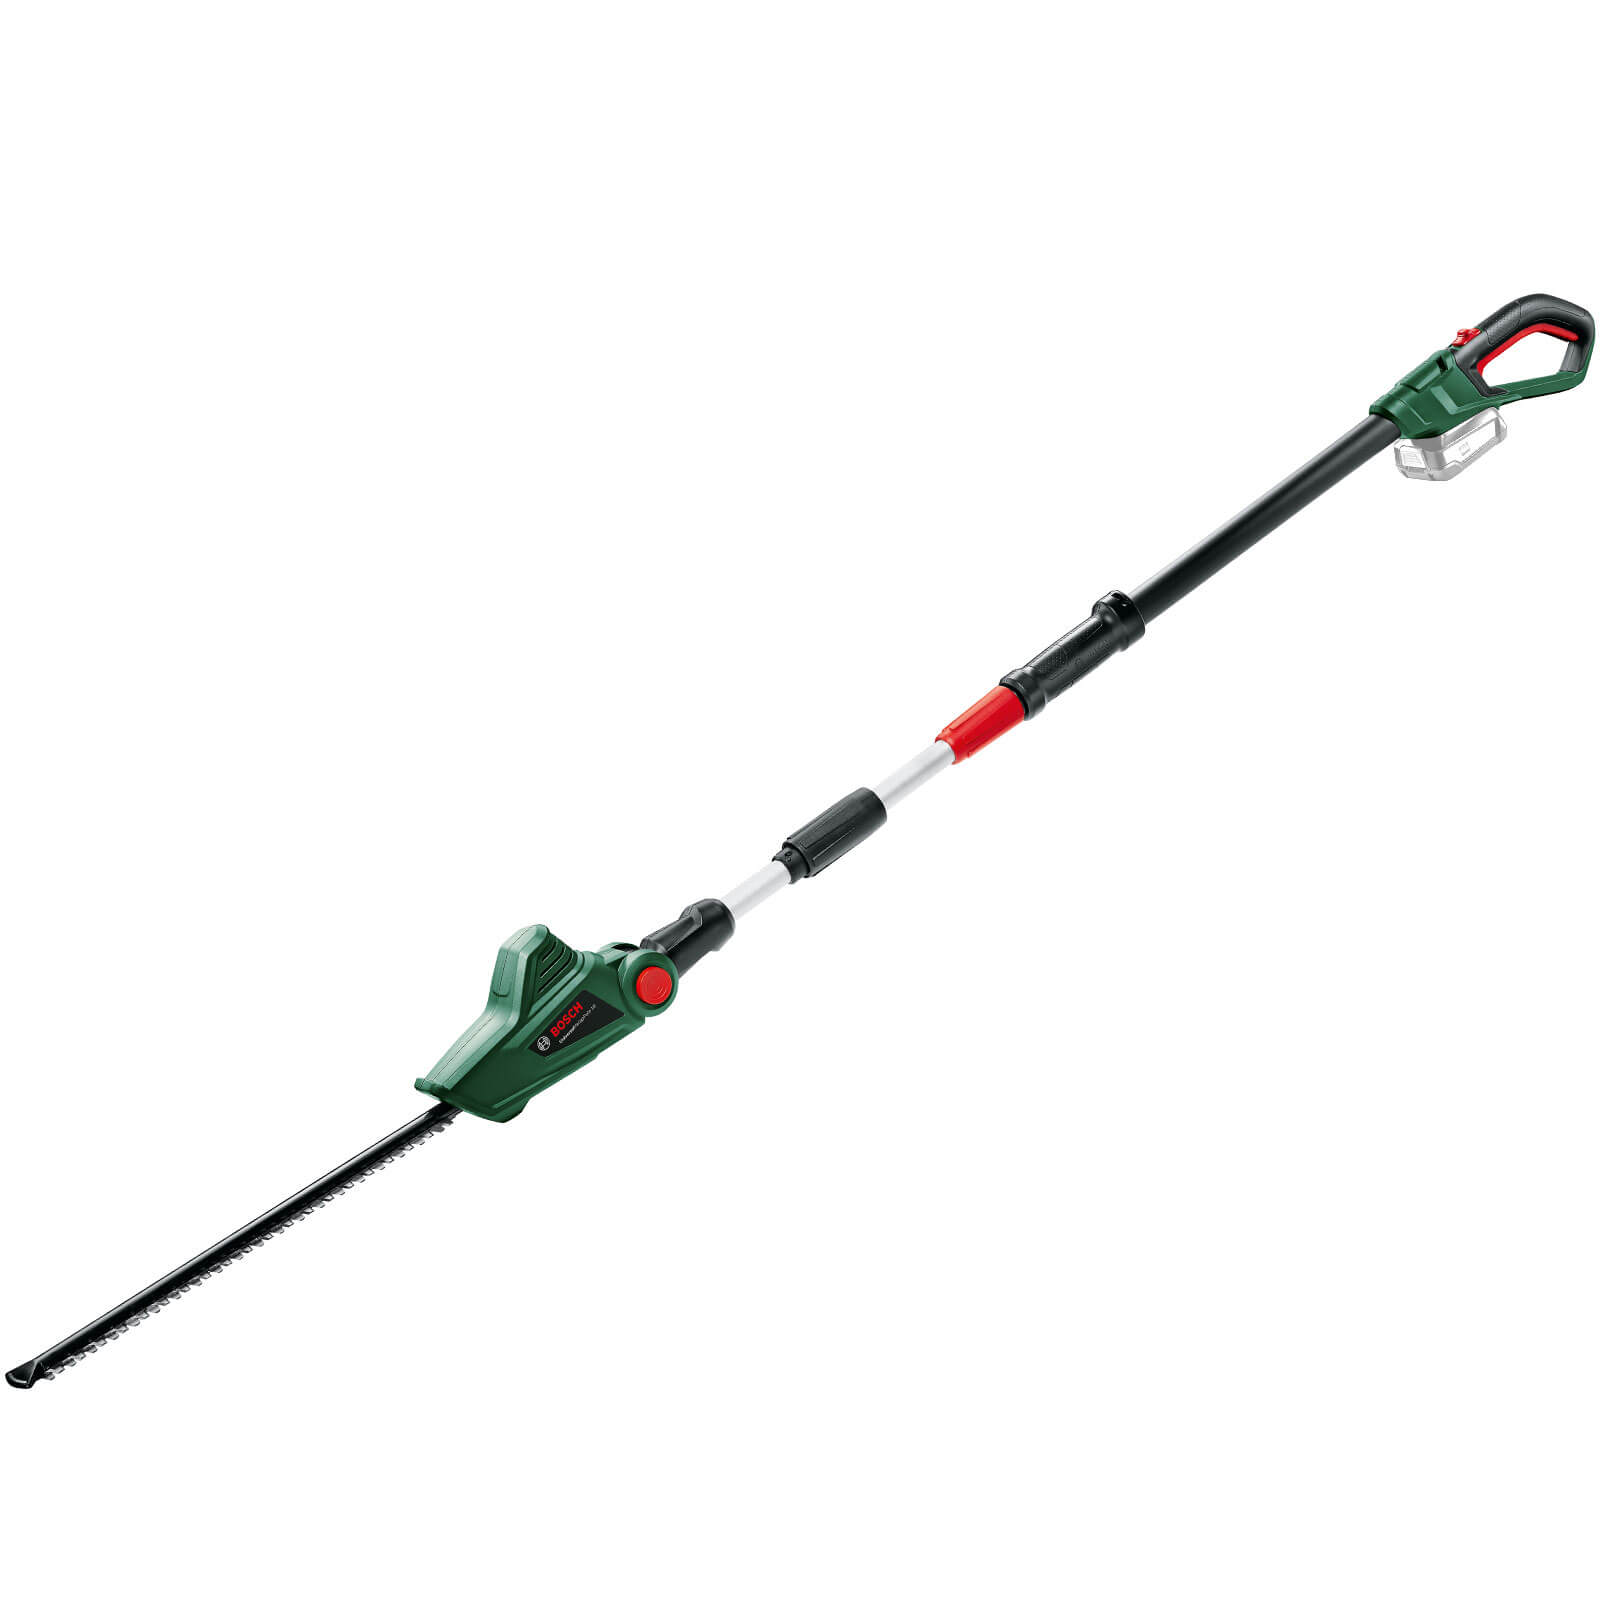 Bosch UNIVERSALHEDGEPOLE P4A 18v Cordless Telescopic Pole Hedge Trimmer 430mm No Batteries No Charger